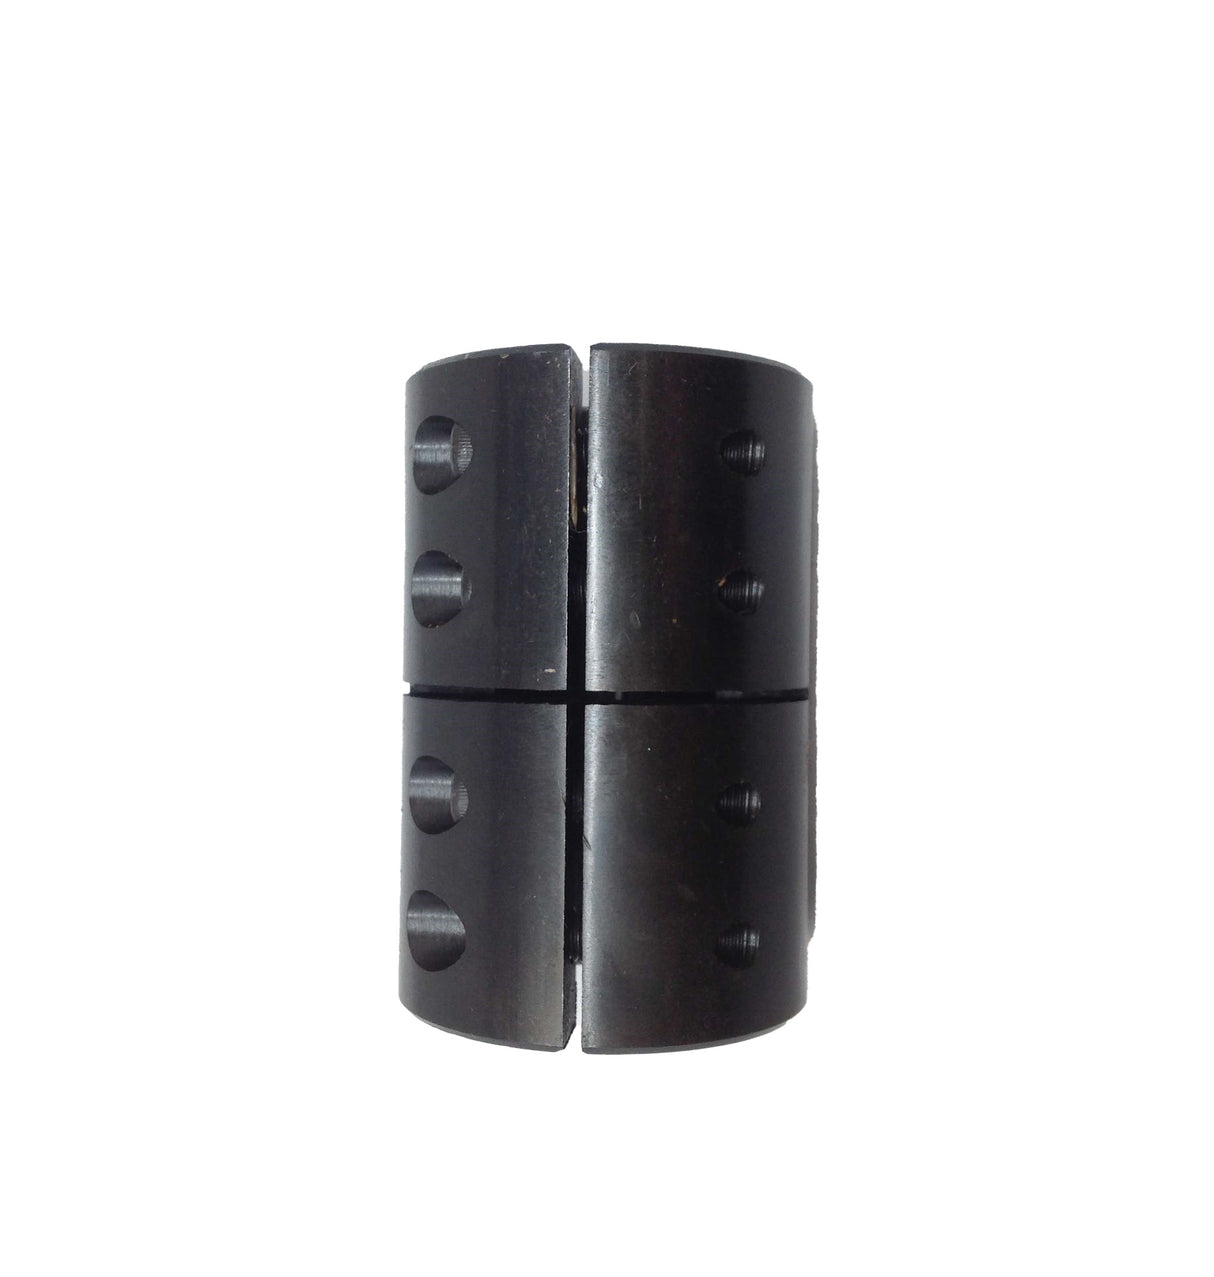 CLIMAX METAL PRODUCTS COMPANY ­-­ CC-125-125-KW ­-­ ONE PIECE CLAMPING COUPLING 1-1/4 BORE